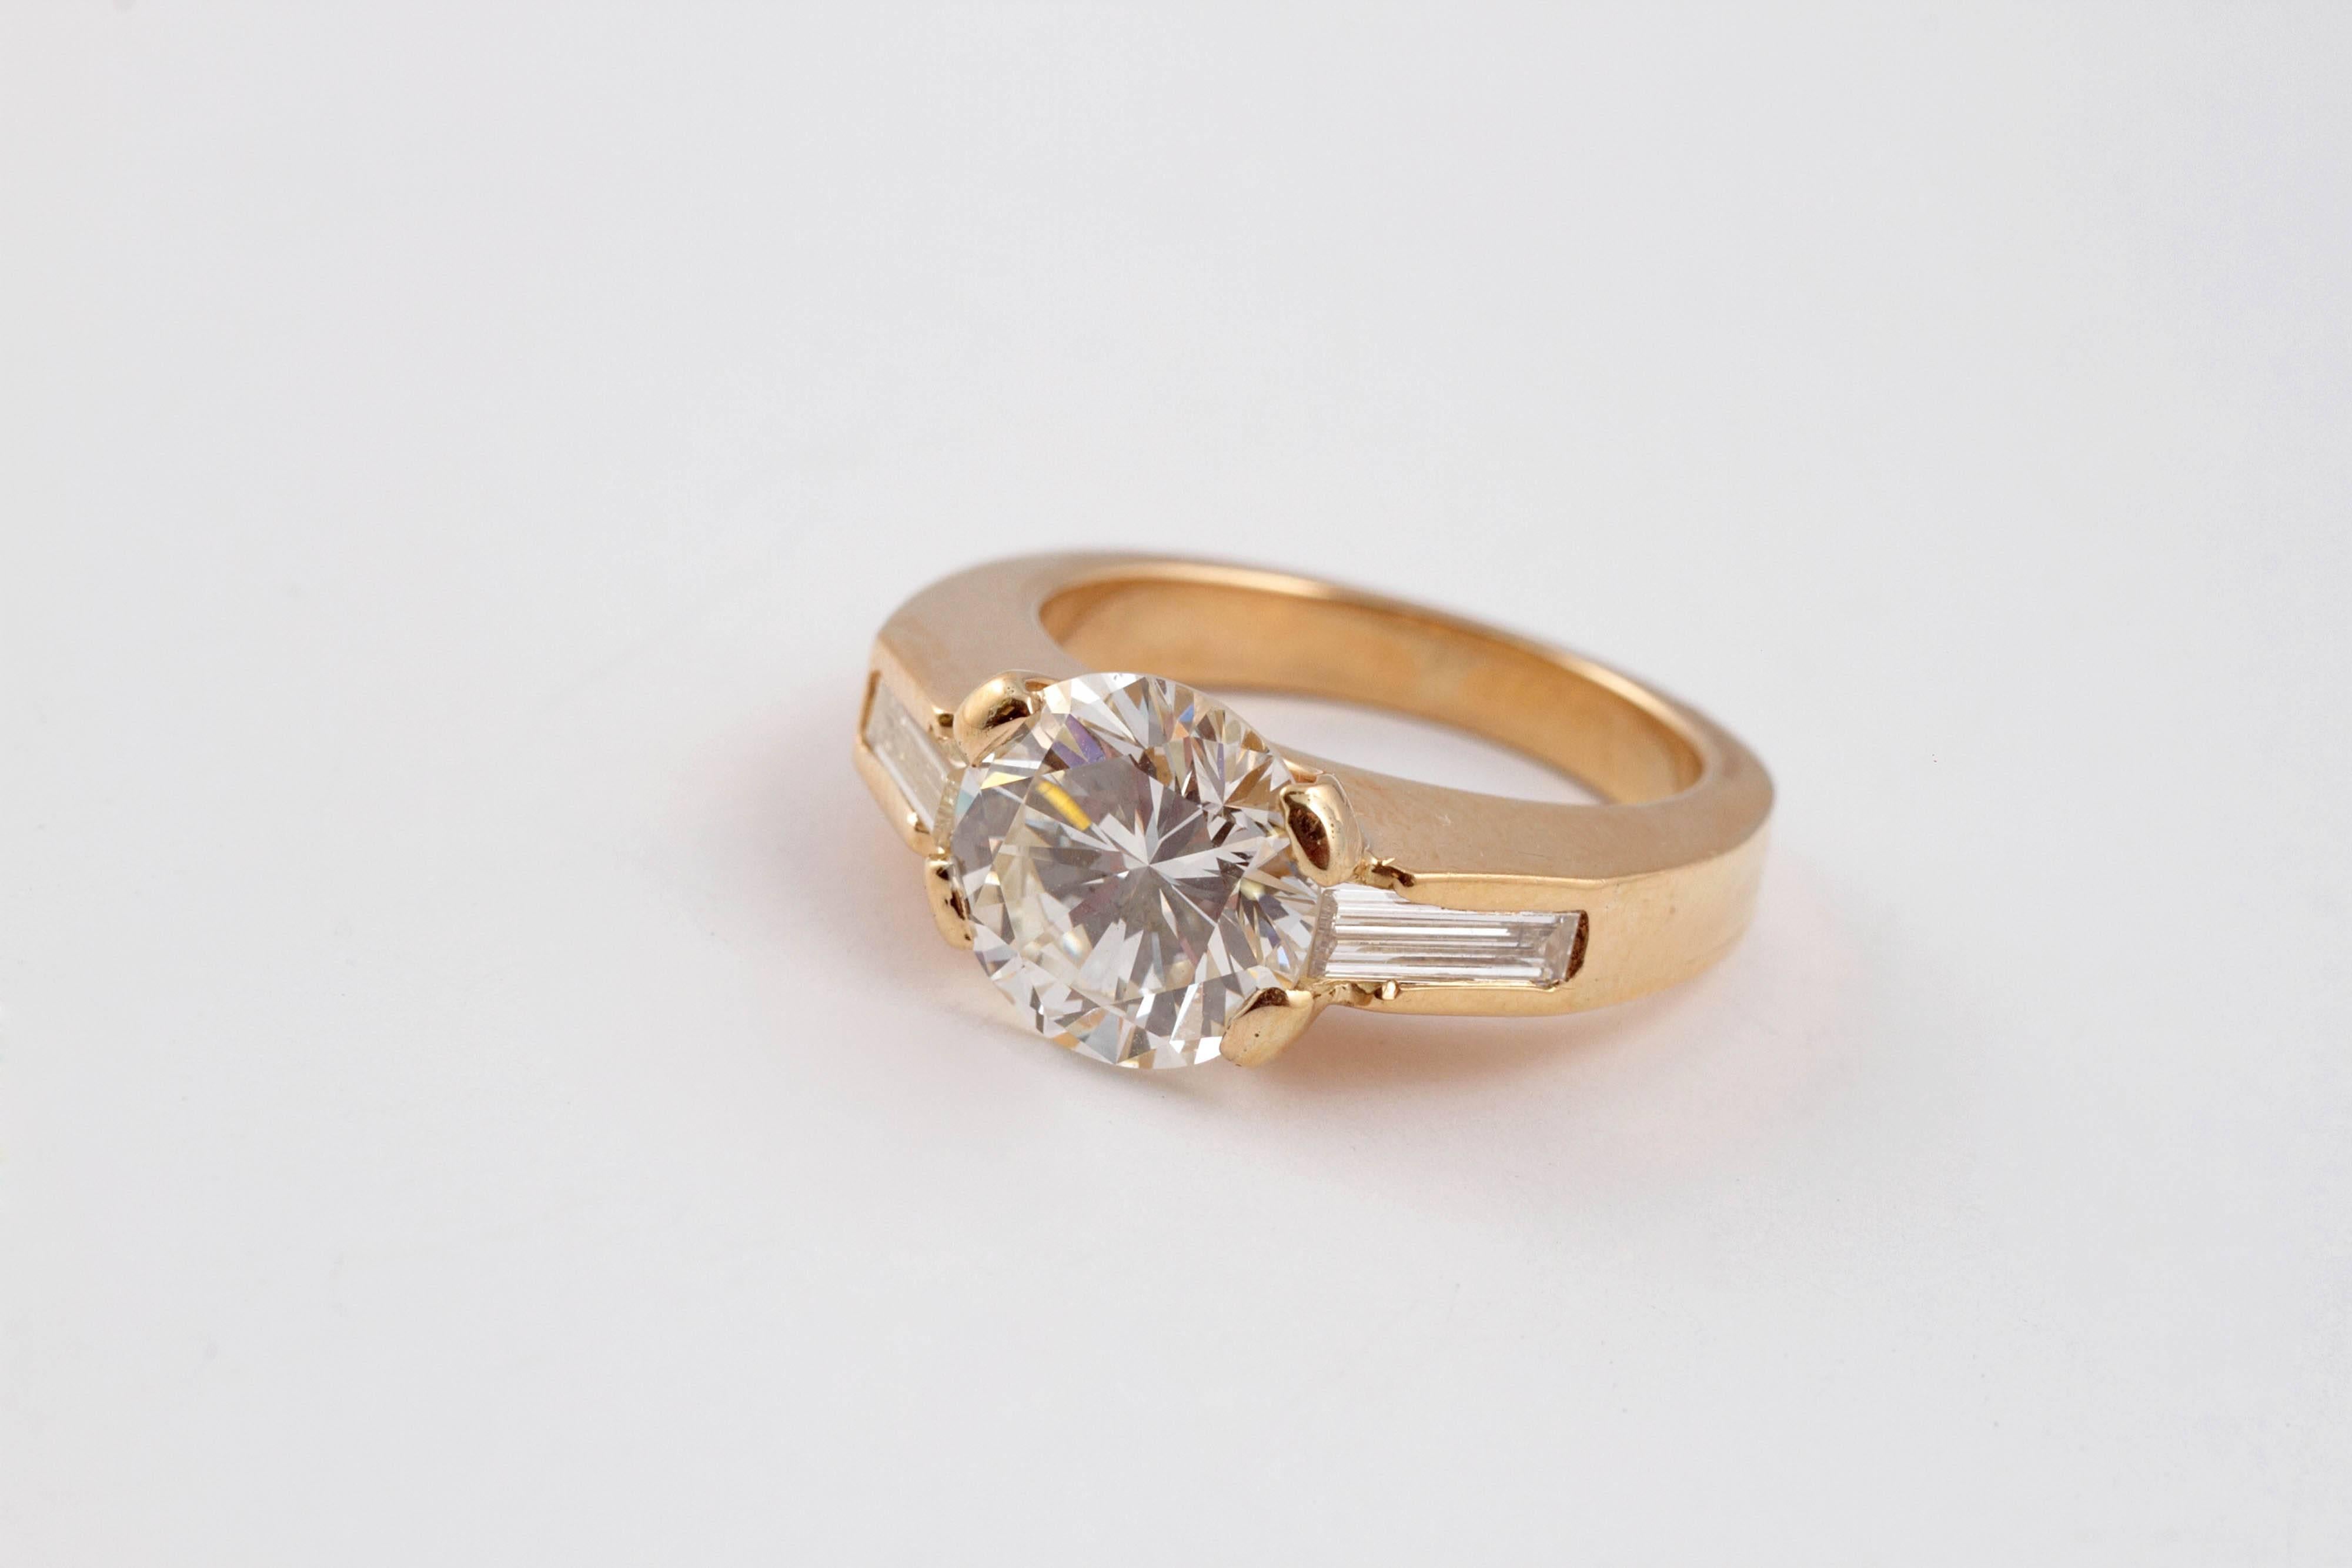 3.11 carat round diamond with baguette side stones in polished 18 Karat gold shank.  Size 6 1/2.